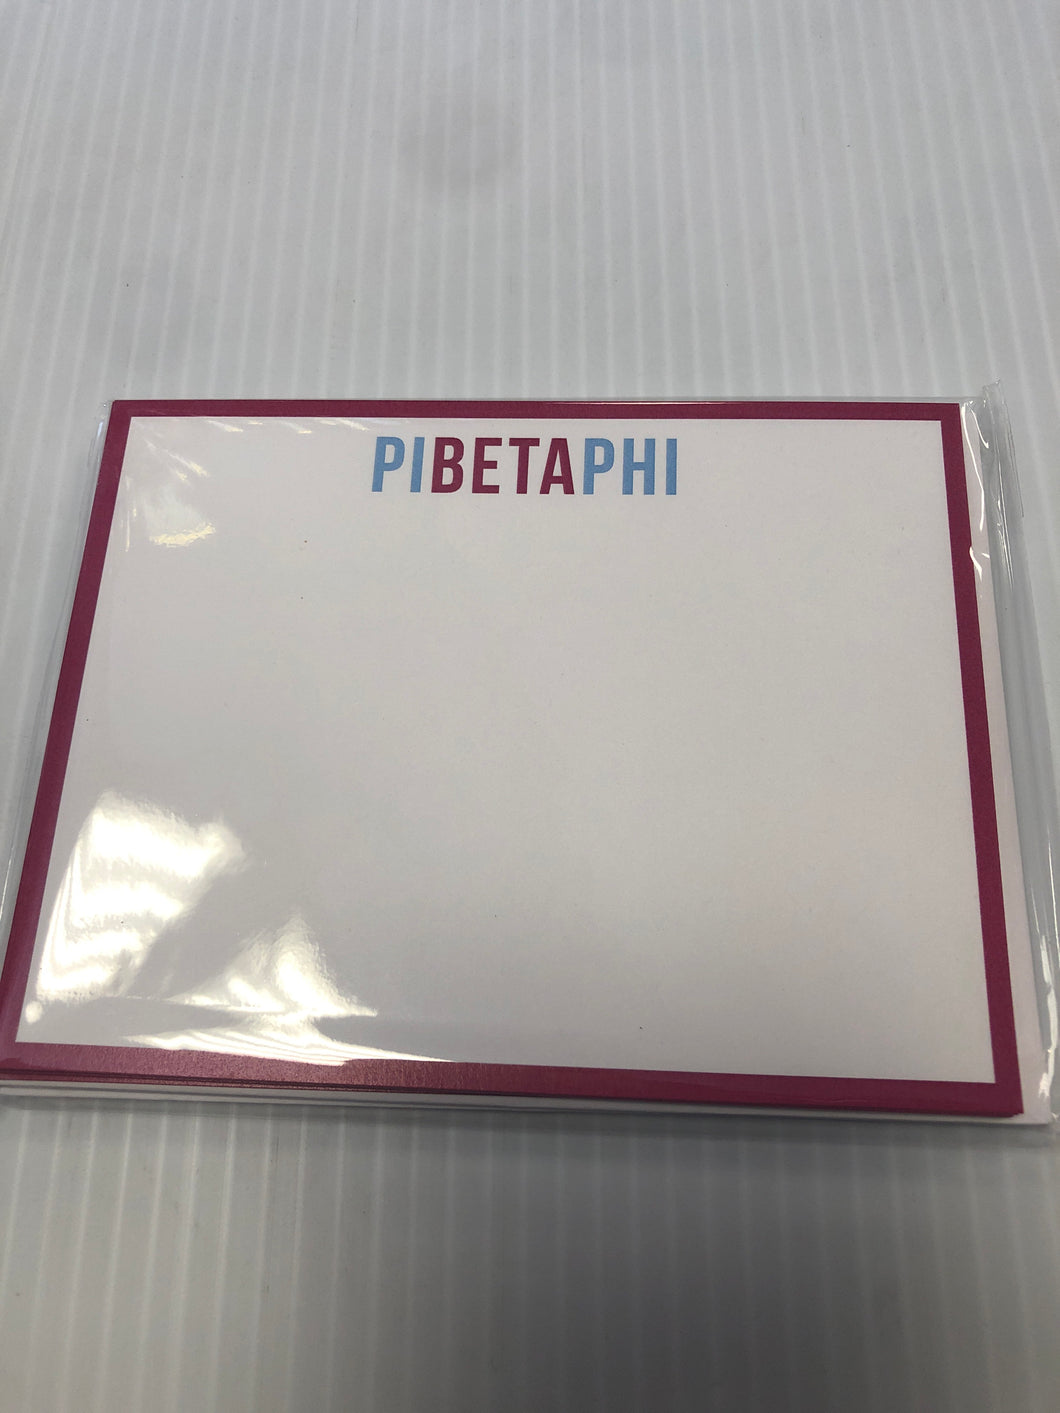 Pi Beta Phi notecards 10 count with envelopes